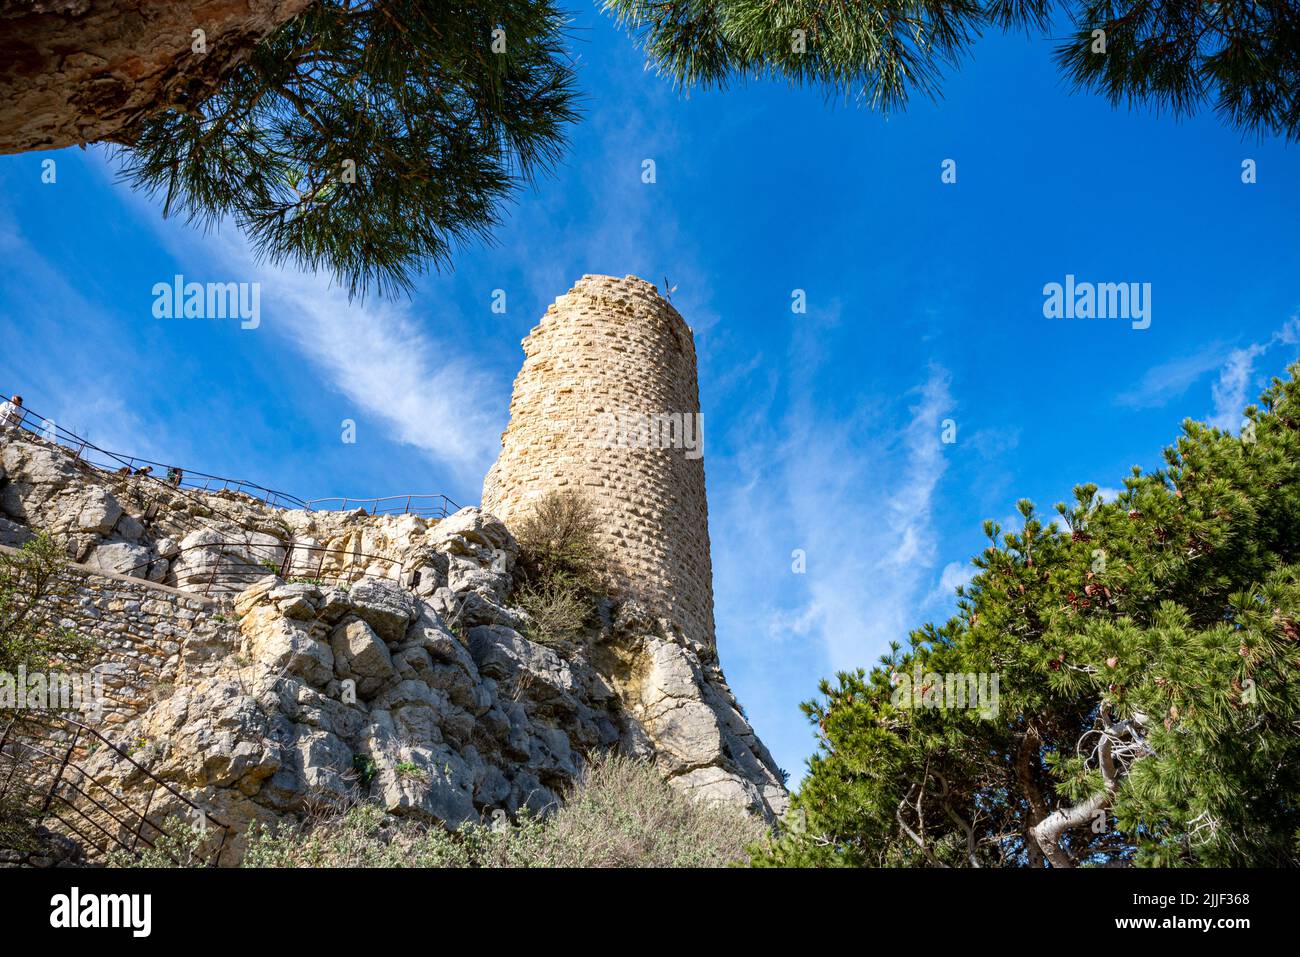 Ruins of the dungeon of the Gruissan castle (Barbarossa tower) taken from bellow on a sunny winter afternoon with no people Stock Photo